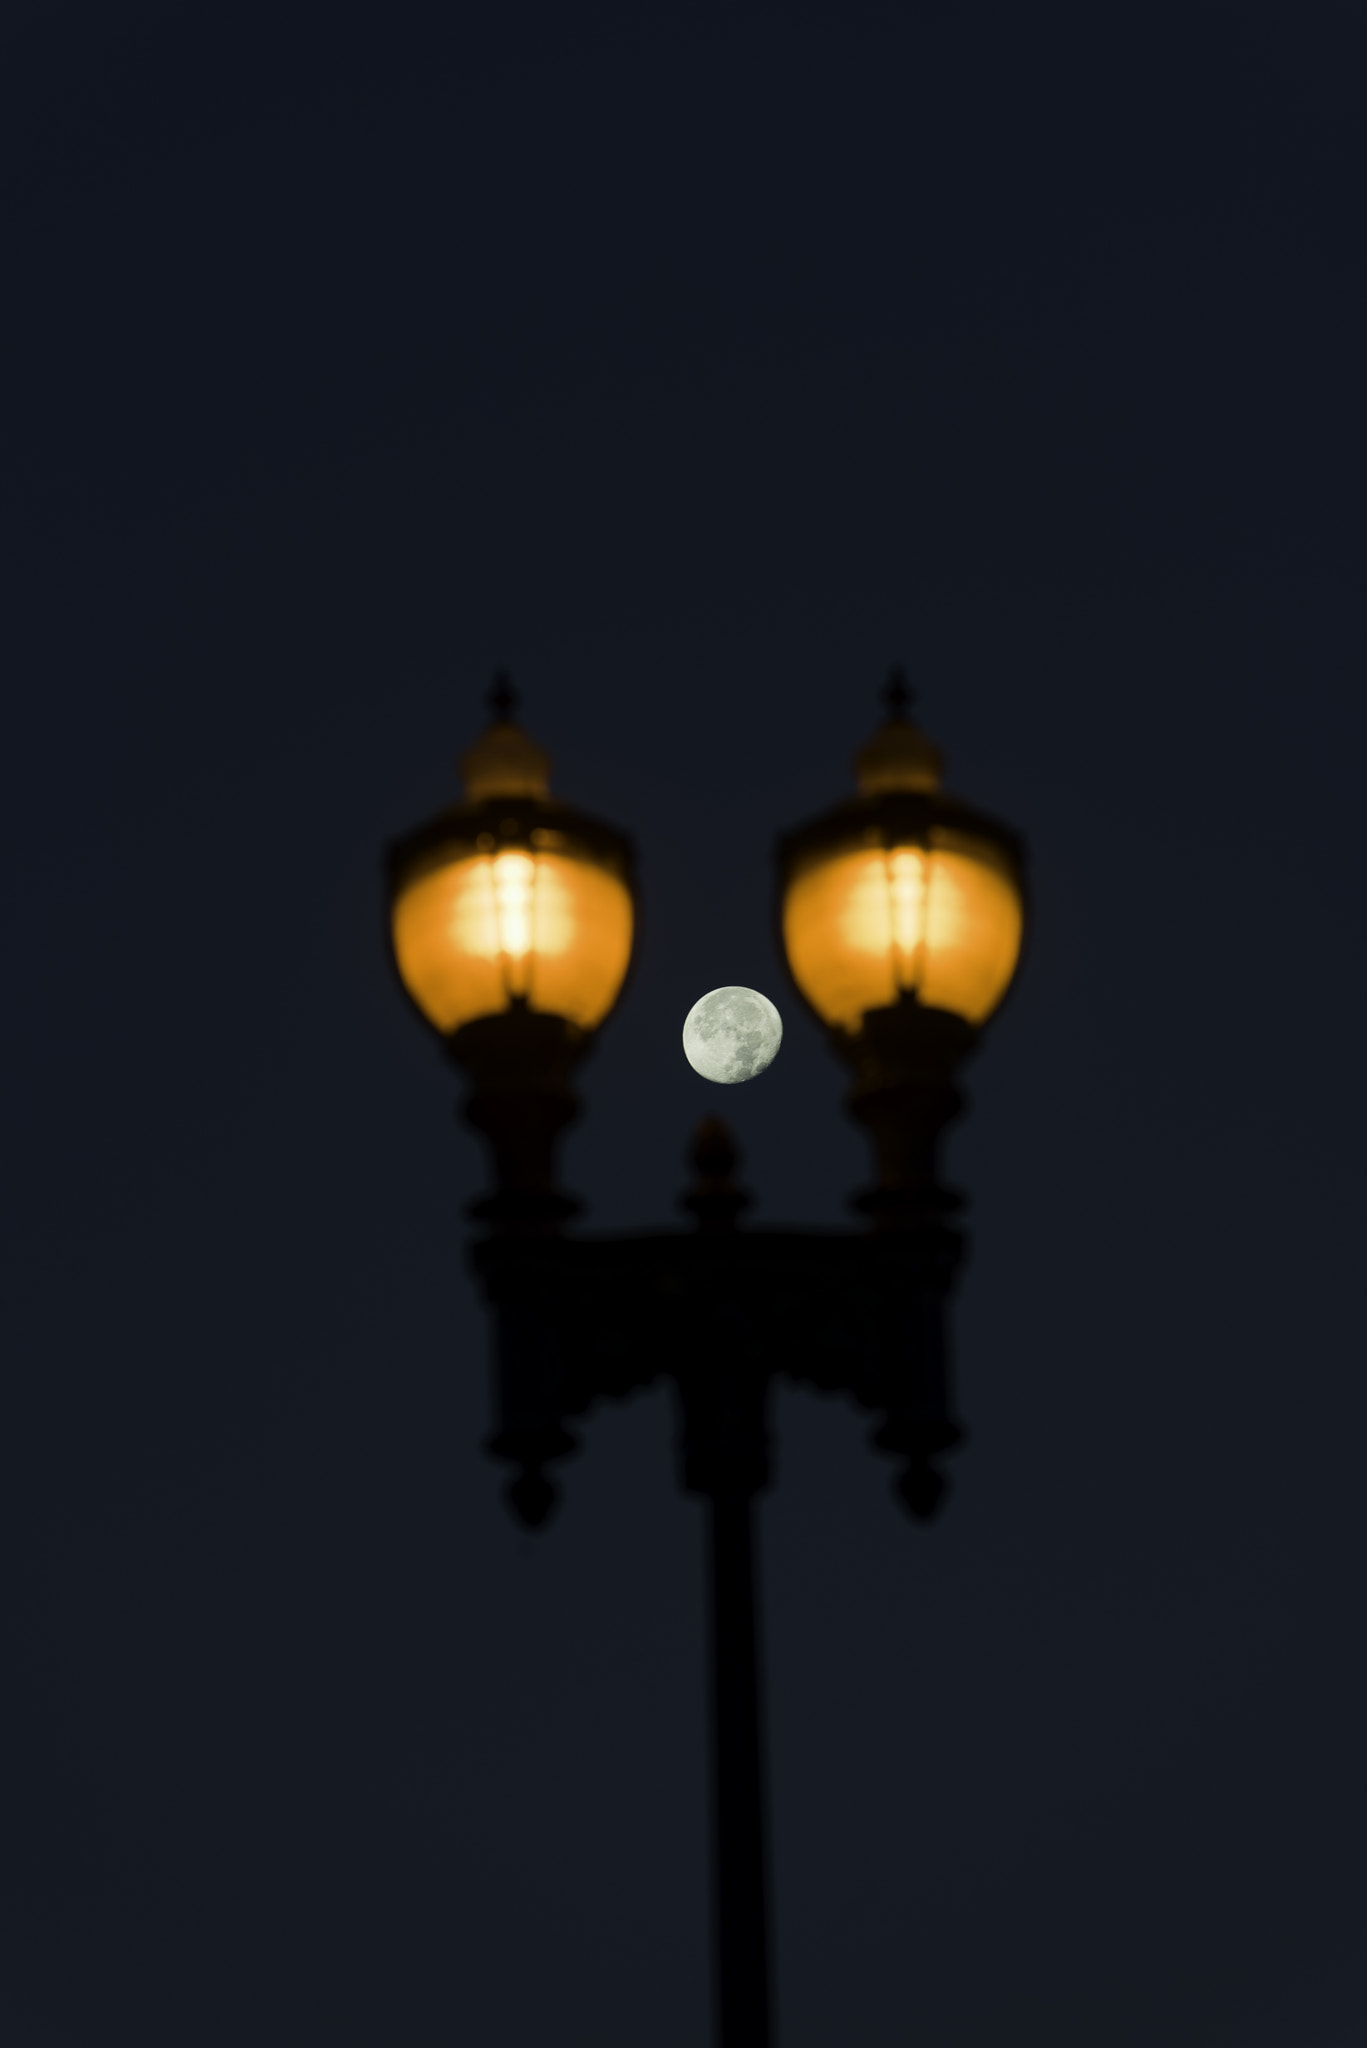 Nikon D800 + AF Nikkor 180mm f/2.8 IF-ED sample photo. Supermoon framed by lampost photography